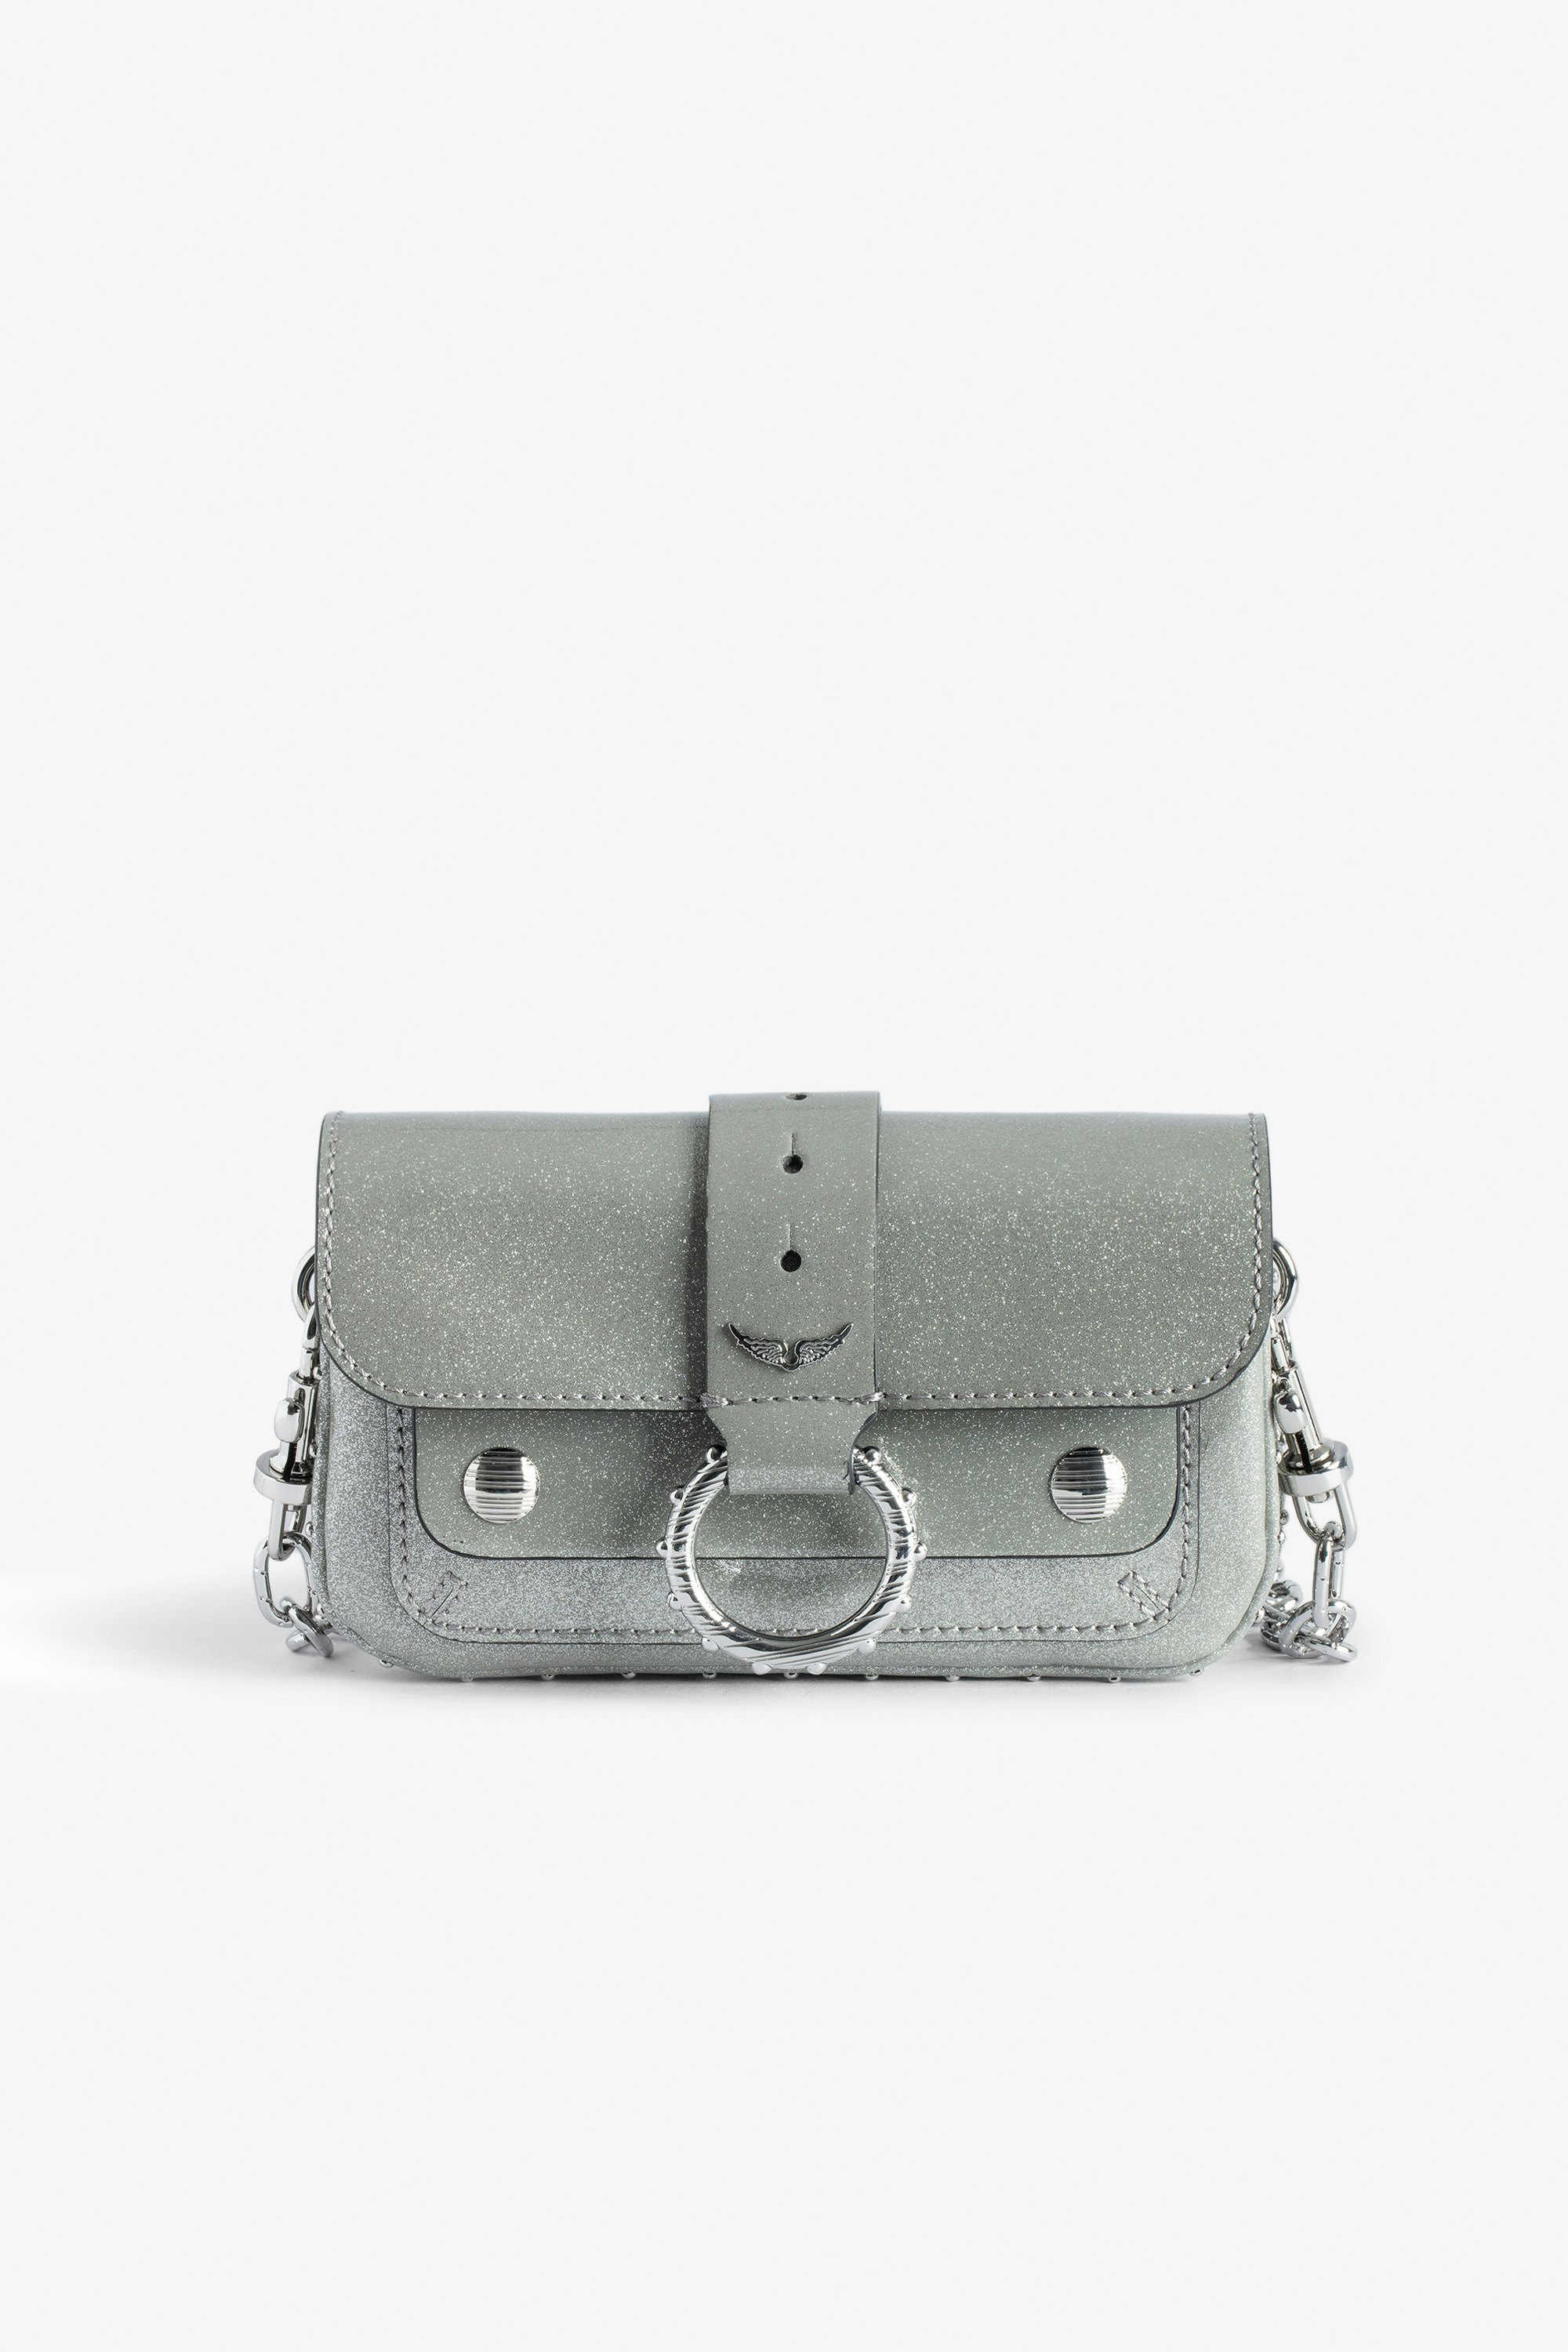 Kate Wallet Infinity Patent Bag - Silver metallic patent leather mini bag with metal chain.